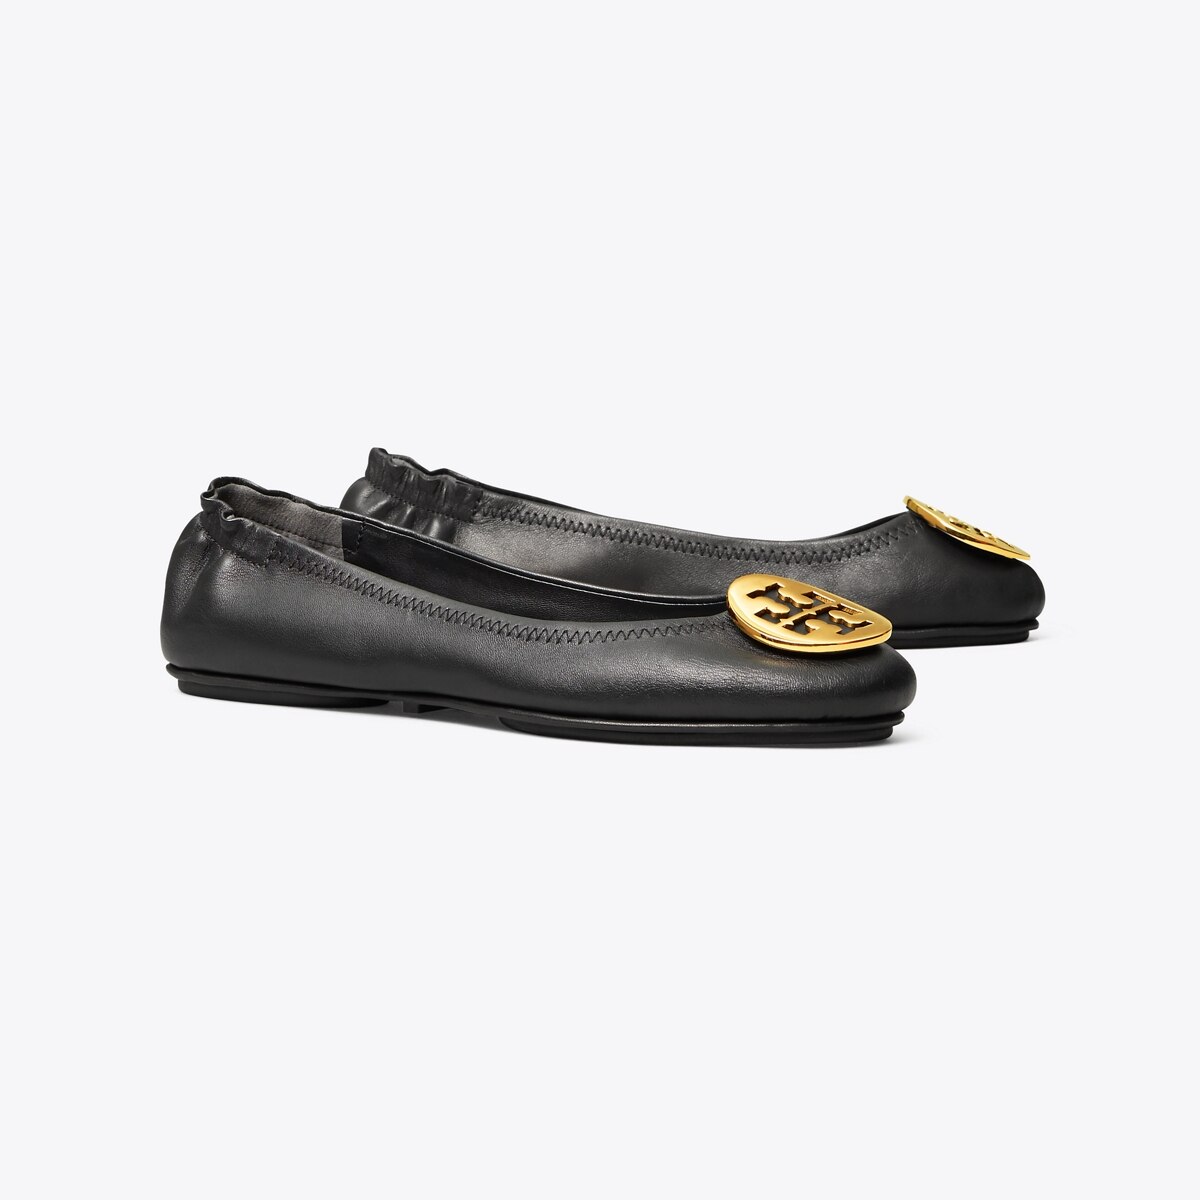 Tory Burch Minnie Travel Ballet Flat, Leather Women's Shoes